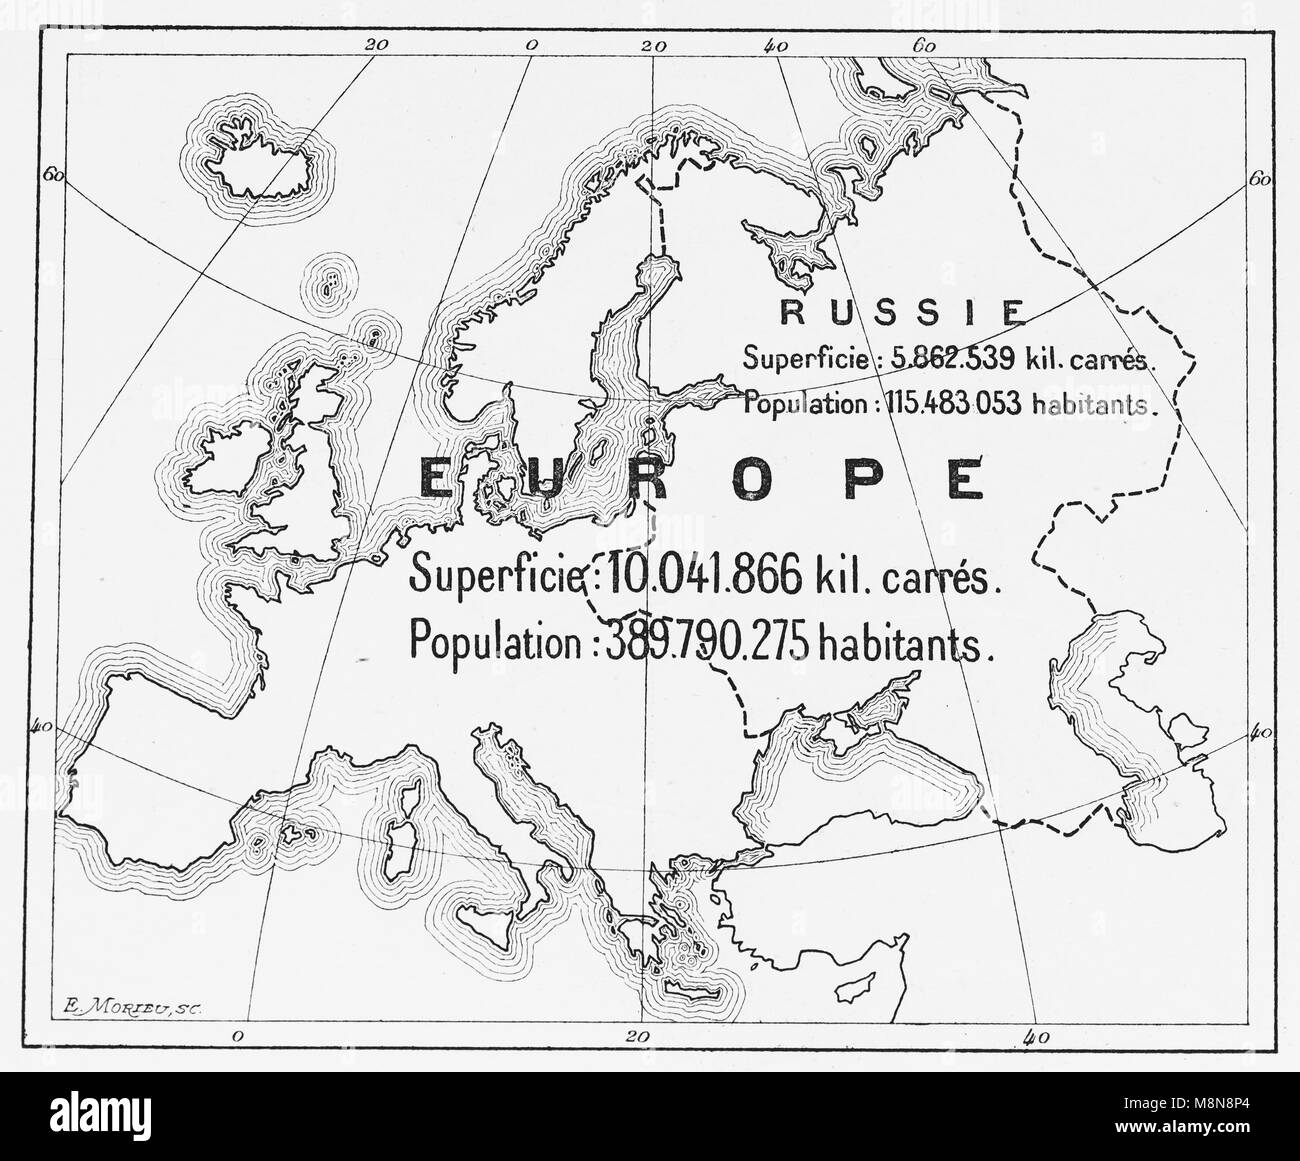 Map of Europe and European part of Russia in 1900, Picture from the French weekly newspaper l'Illustration, 27th October 1900 Stock Photo